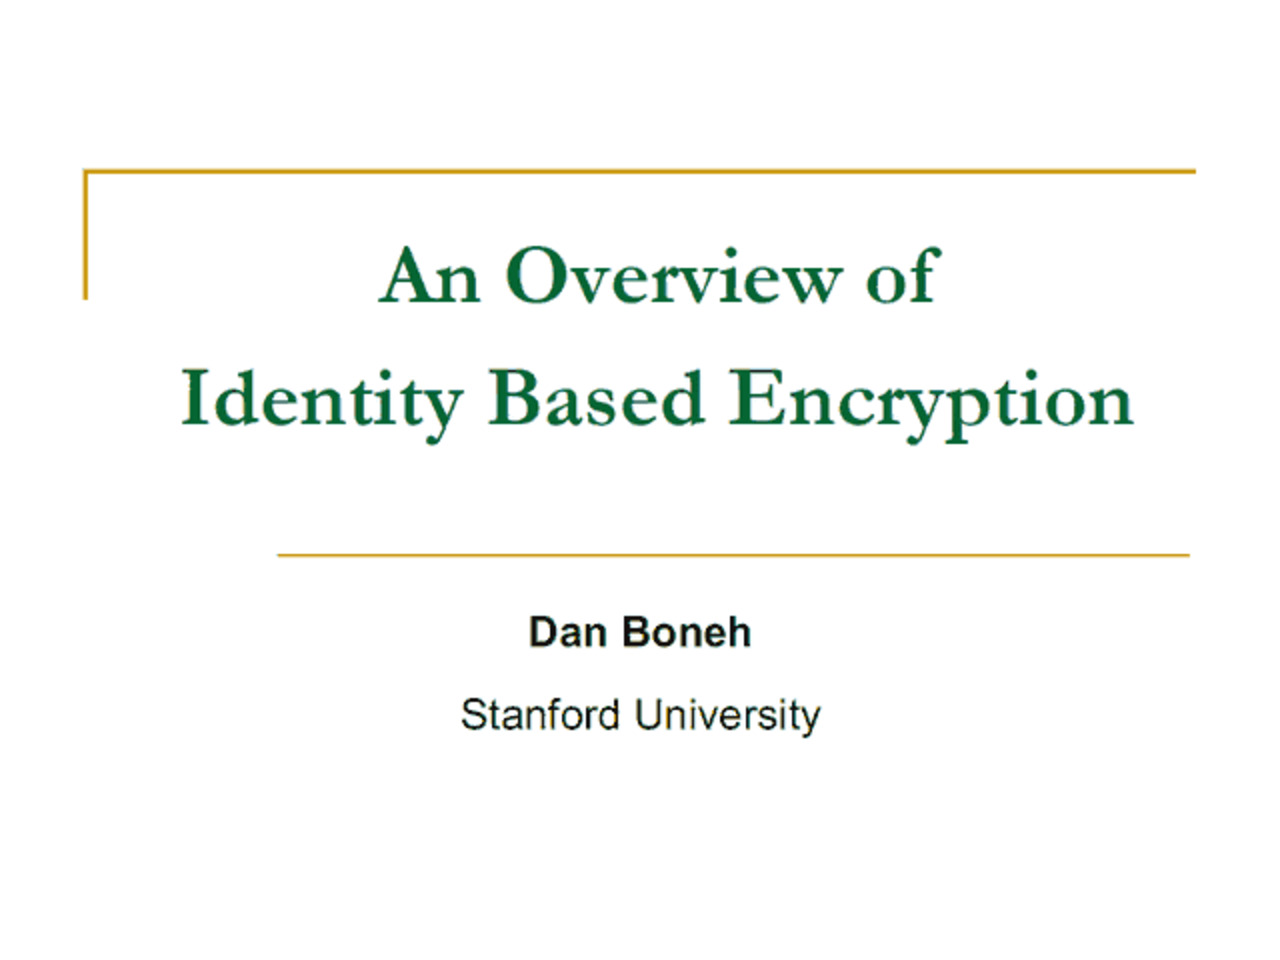 PEC-STPPA5 Invited talk 1: Identity Based Encryption: an Overview